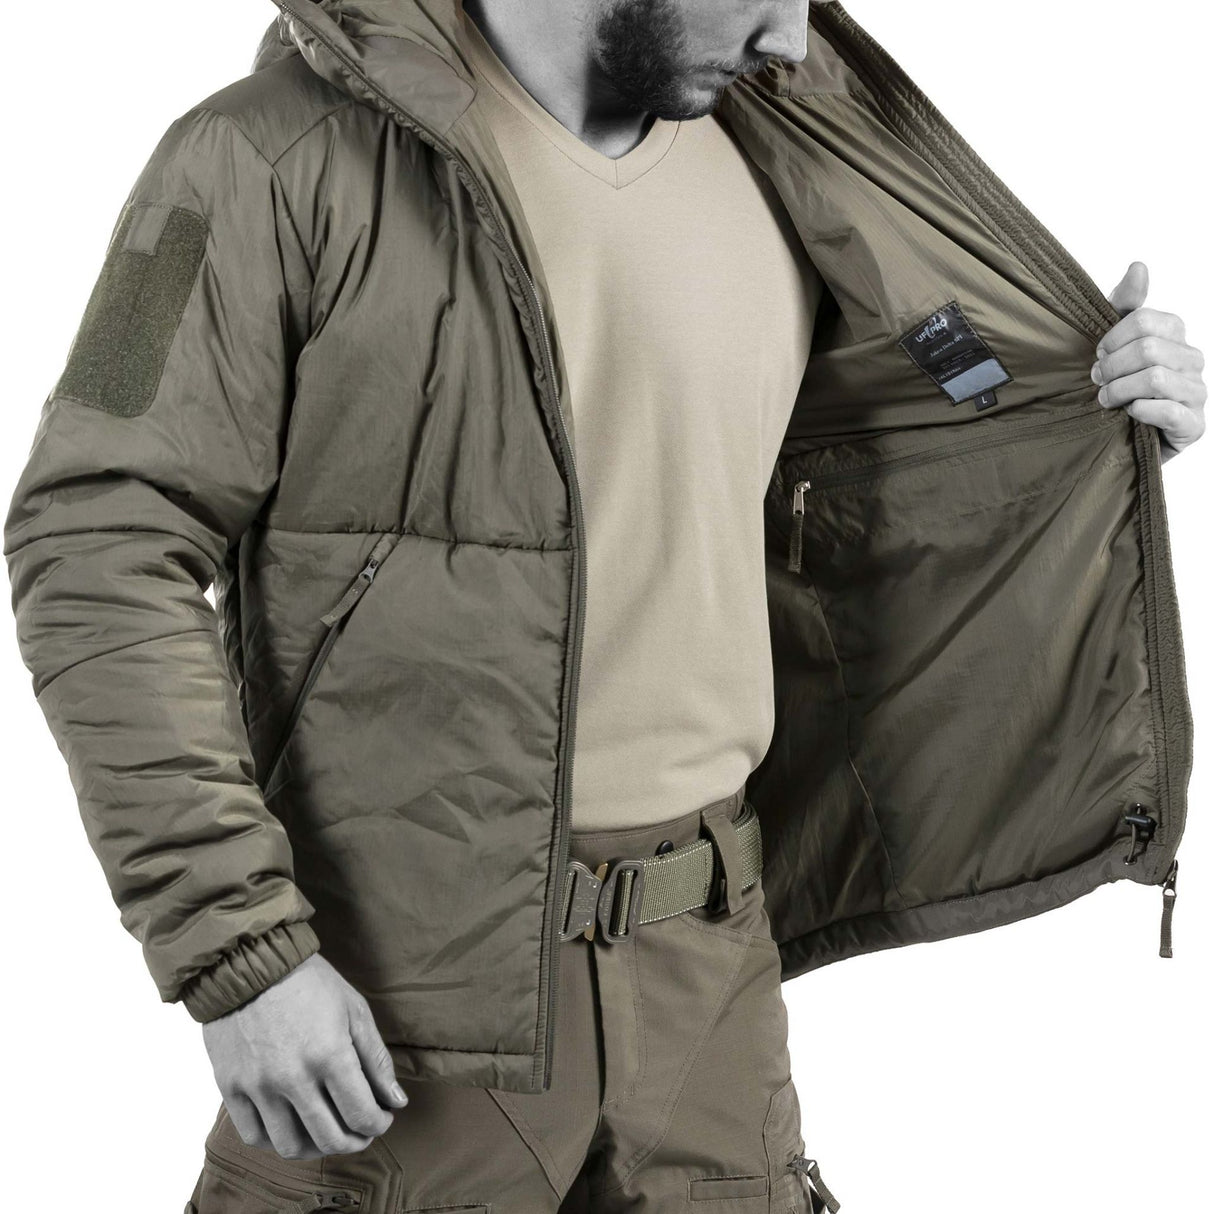 UF PRO Delta ComPac Tactical Winter Jacket: Perfect fit ensured with waist adjusters and elastic cuffs.